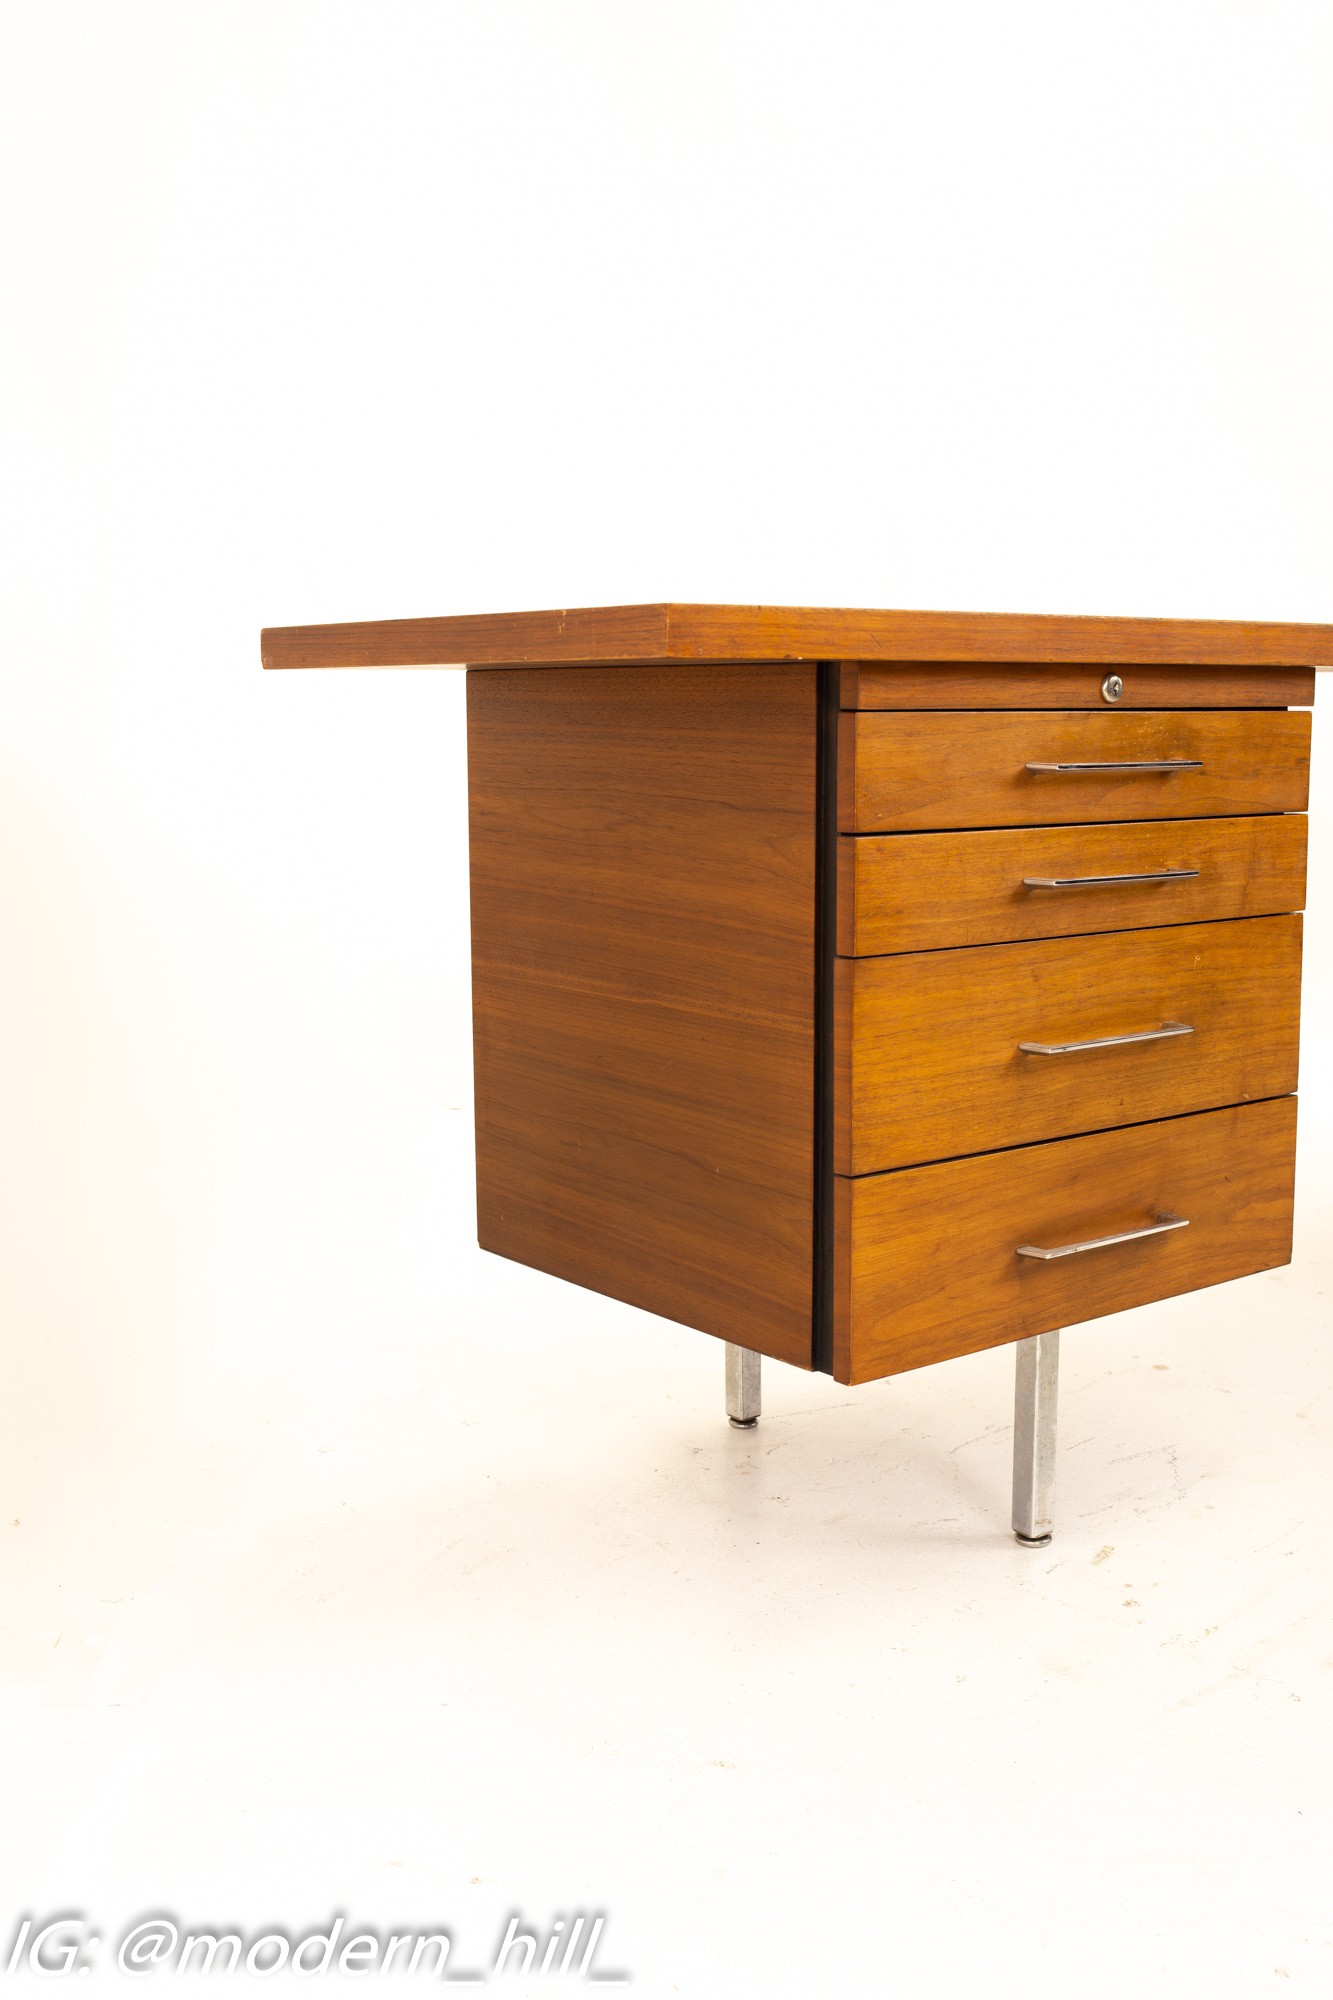 George Nelson for Herman Miller Style Mid Century Walnut & Chrome Executive Desk